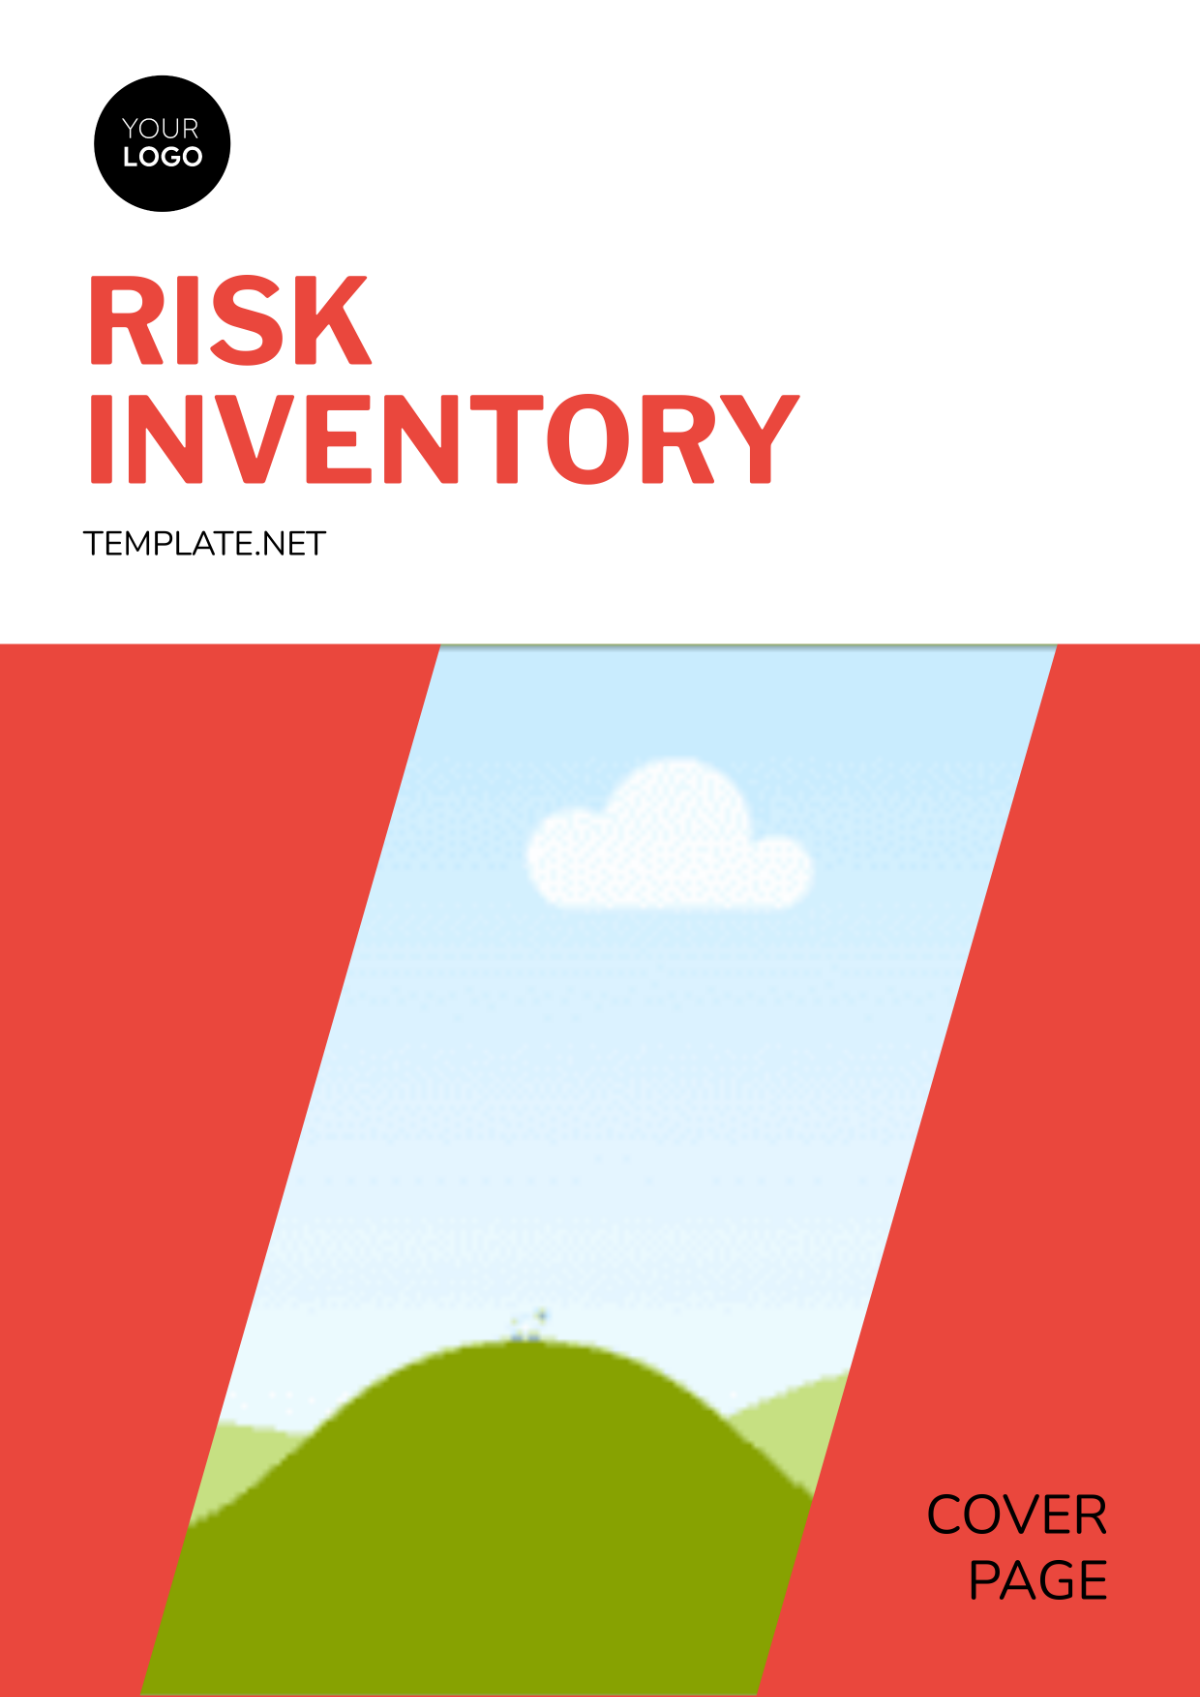 Risk Inventory Cover Page Template